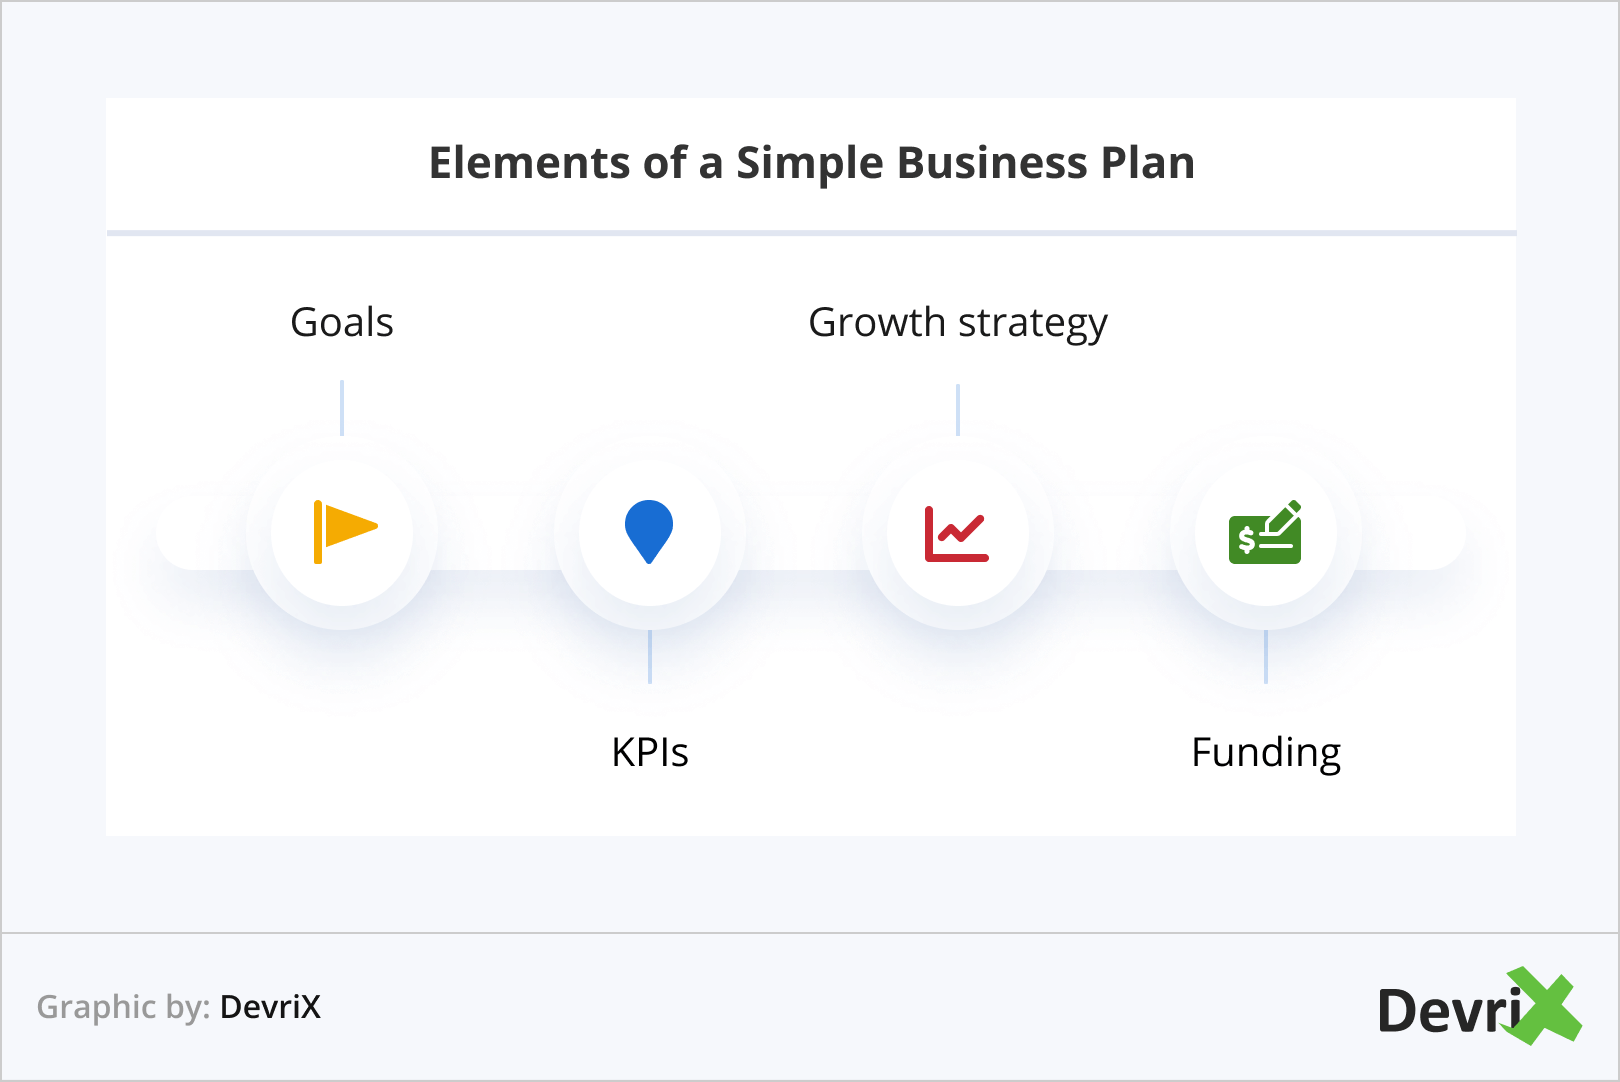 Elements of a Simple Business Plan